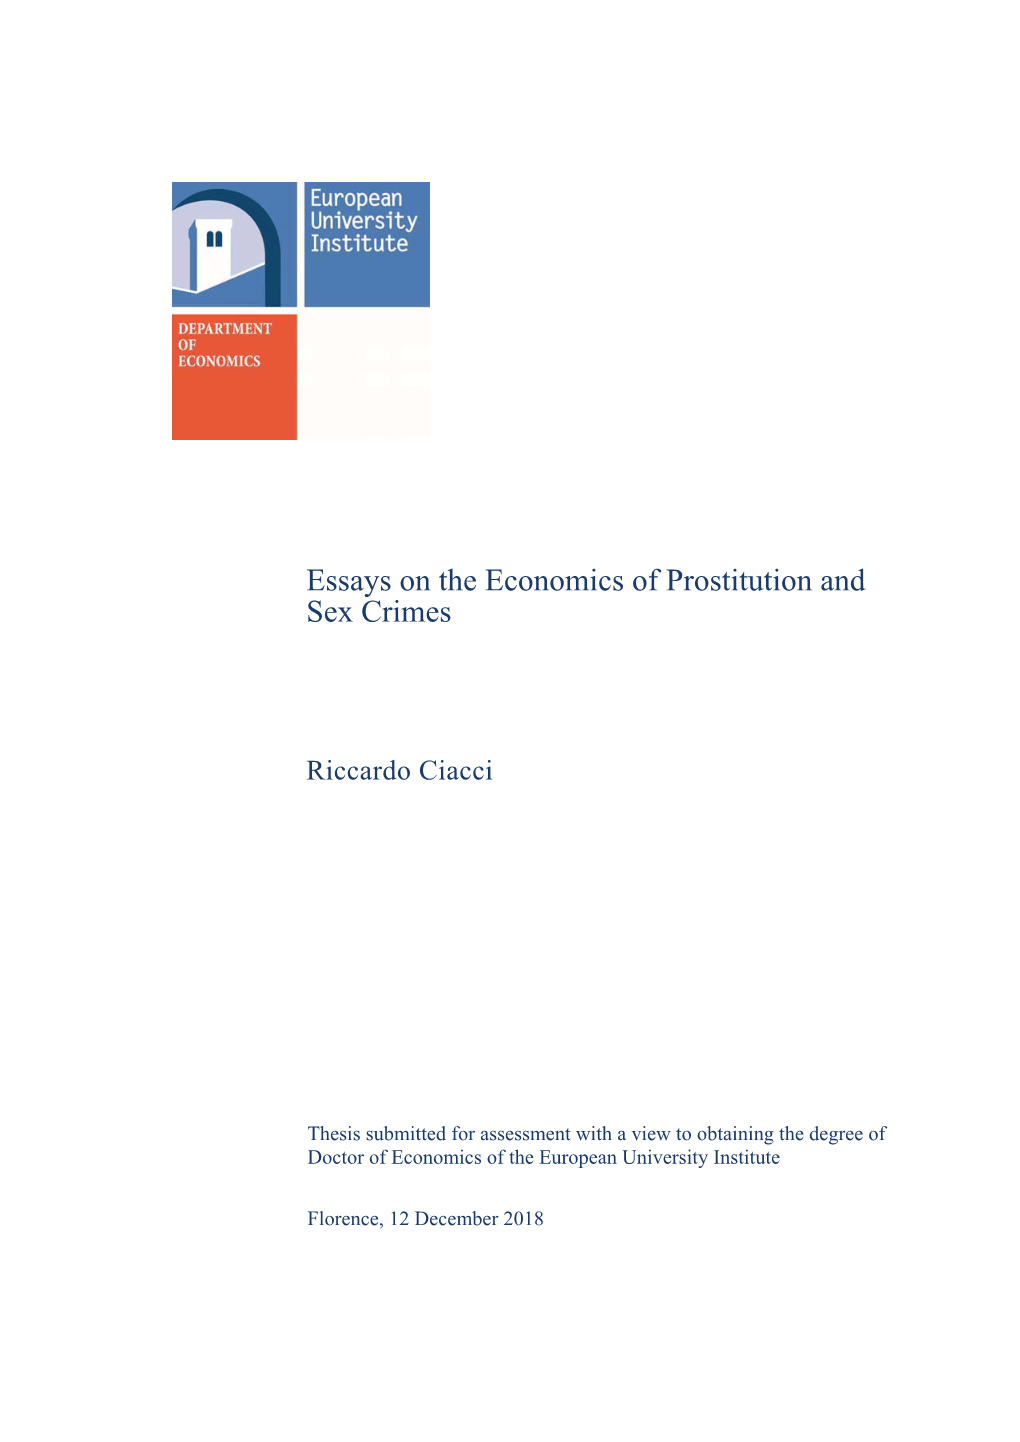 Essays on the Economics of Prostitution and Sex Crimes